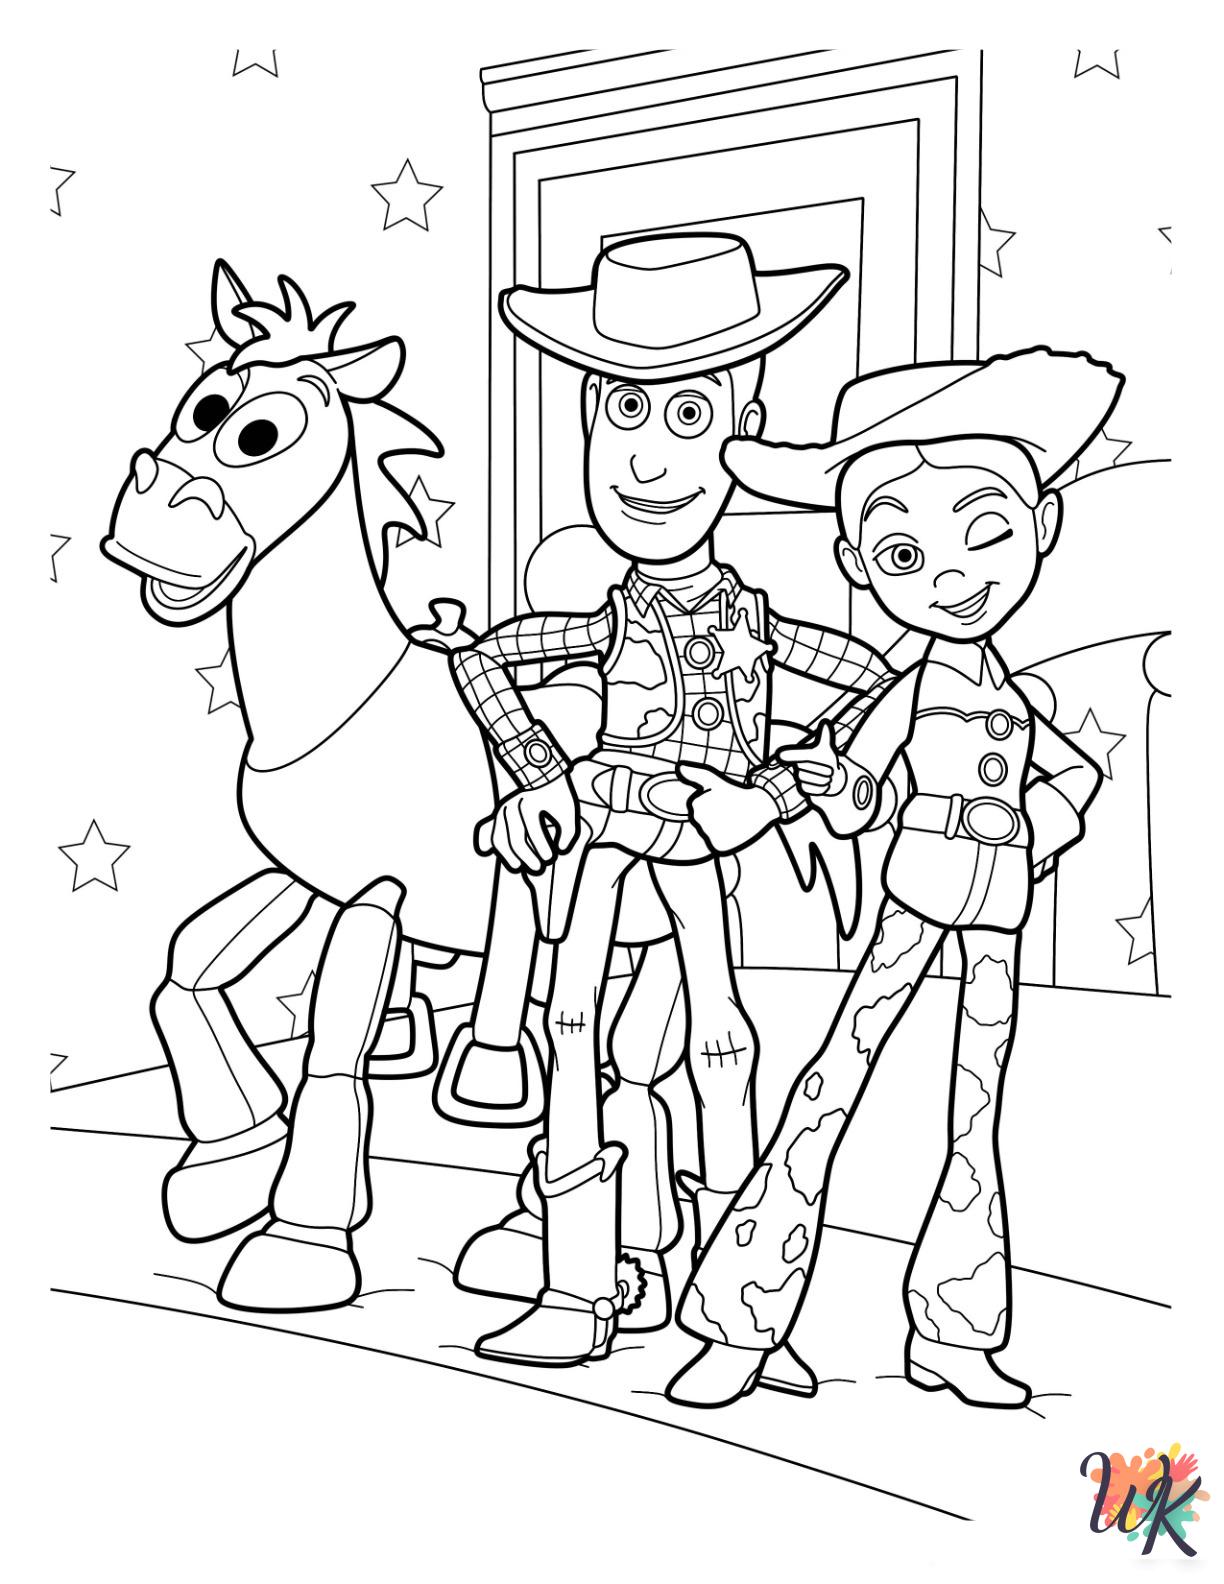 Woody coloring pages for adults easy